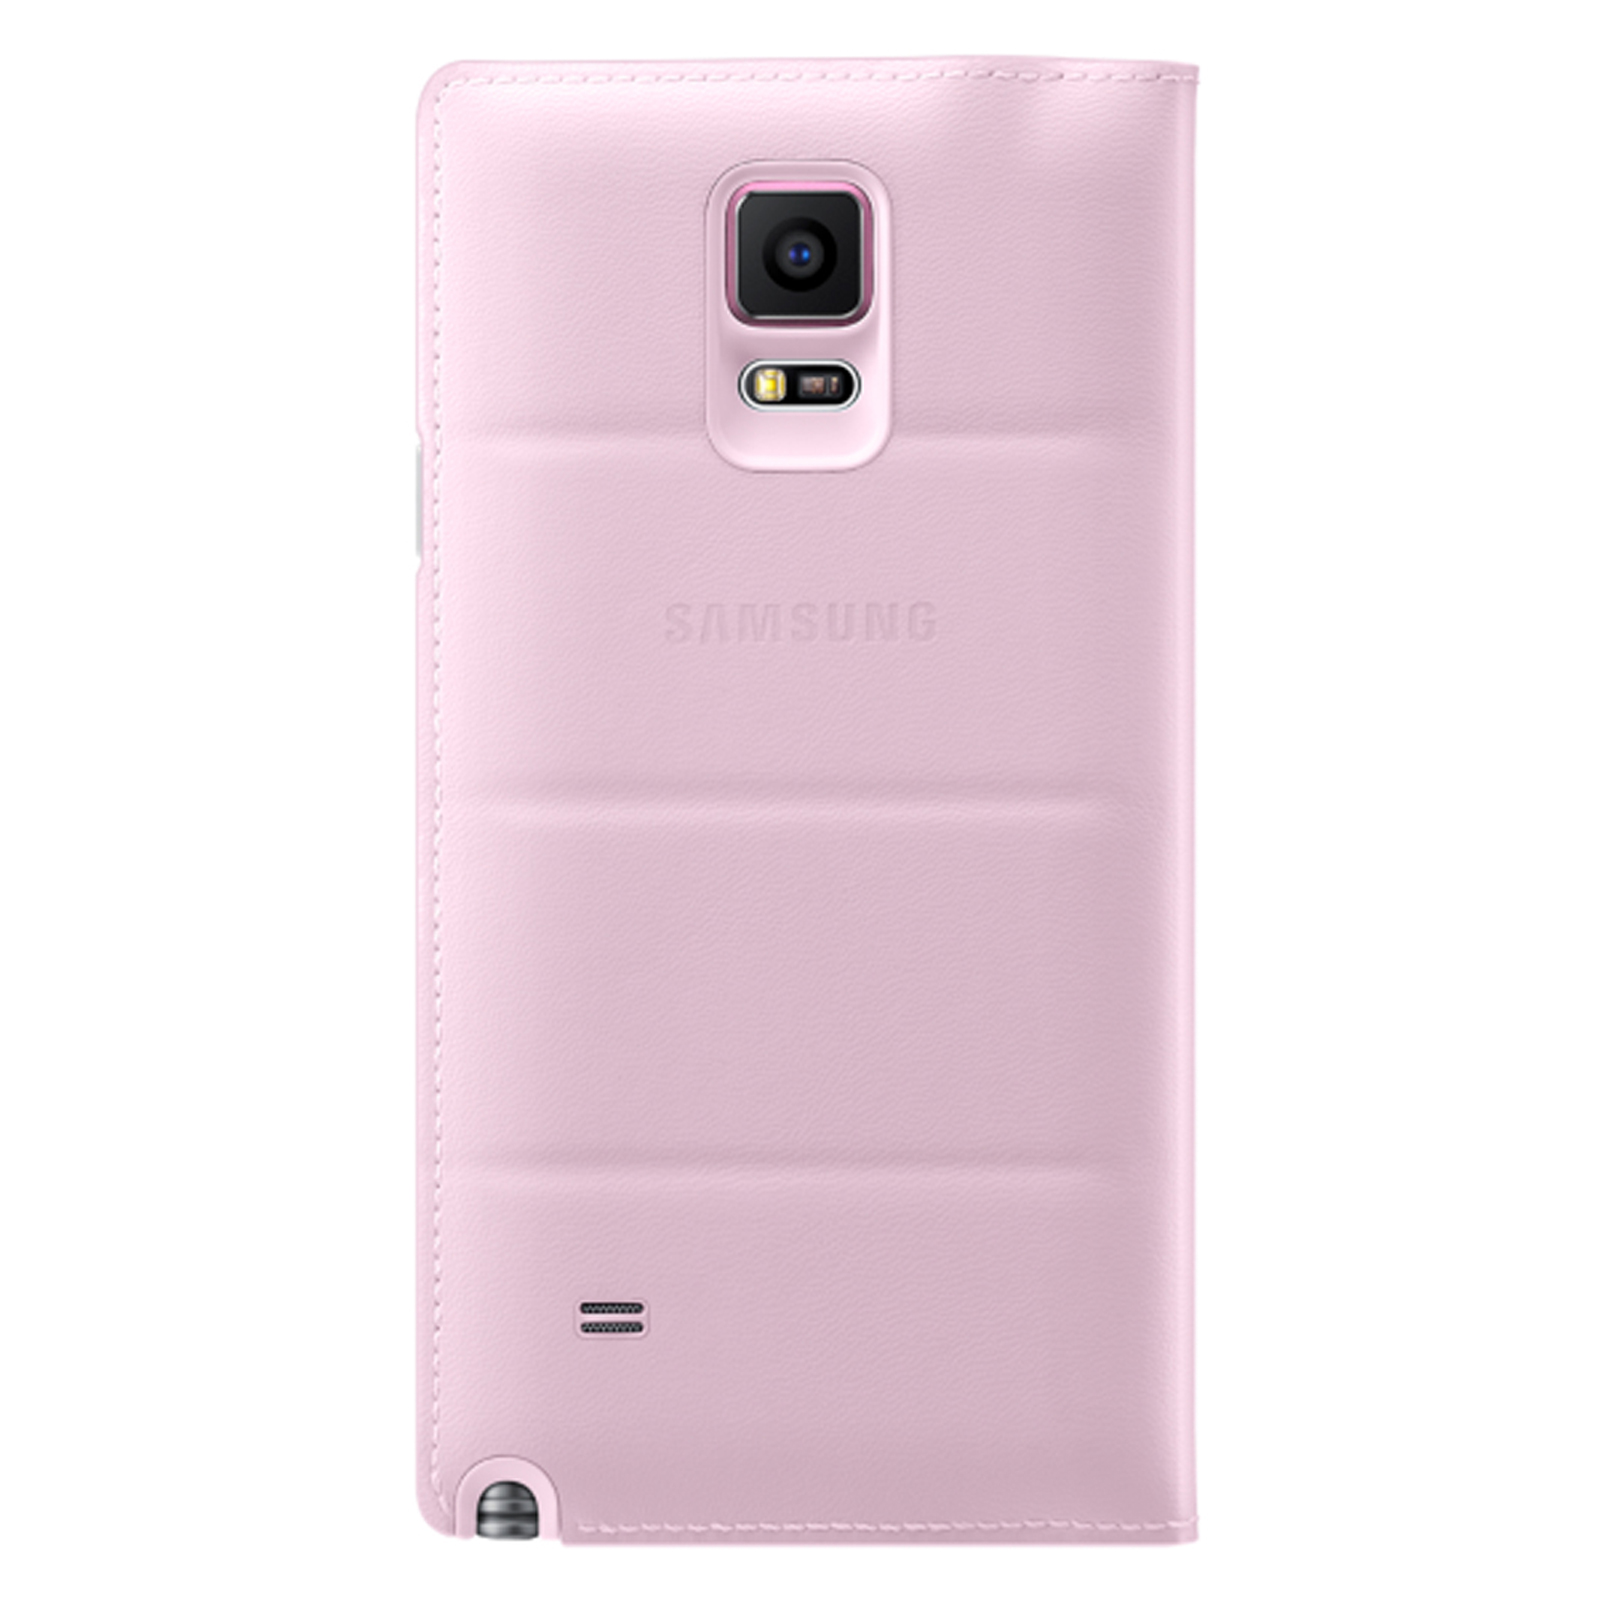 Official Samsung Galaxy Note 4 S-View Case - Pink